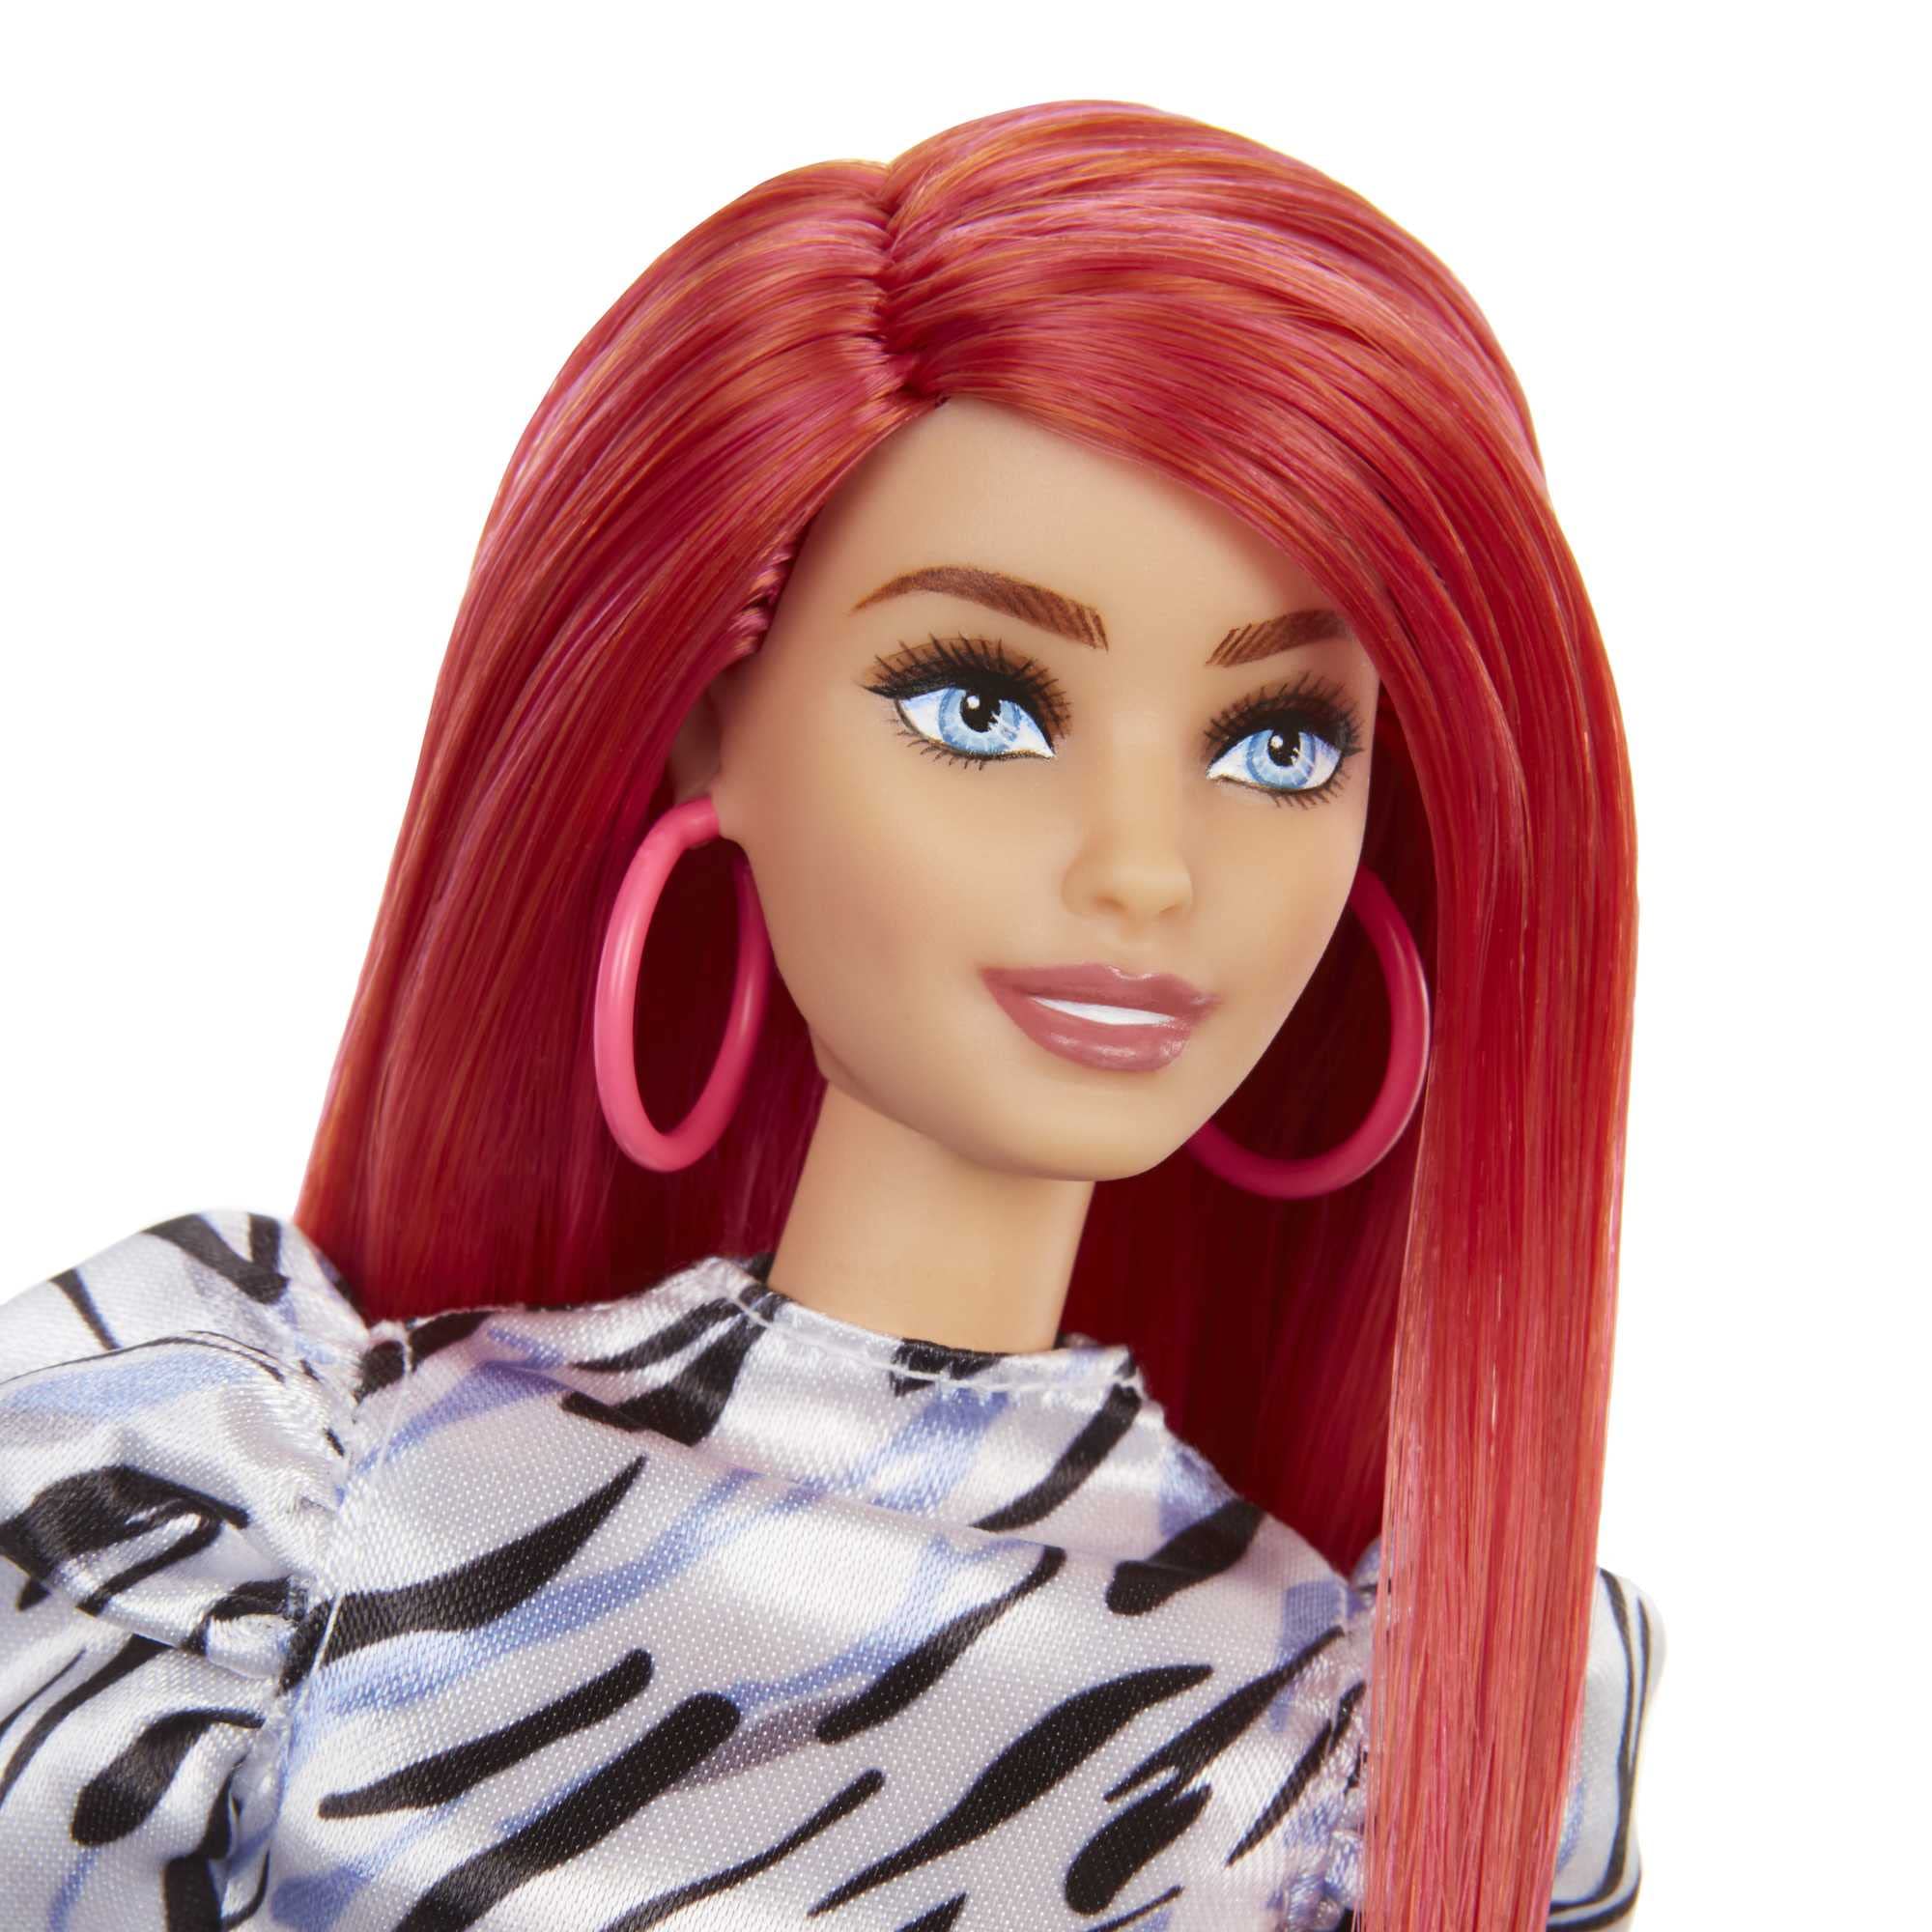 Barbie Fashionistas Doll #168, Smaller Bust, Long Red Hair, Zebra-striped Dress with Puffed Sleeves, Large Hoop Earrings, Slip-on Shoes, Toy for Kids 3 to 8 Years Old